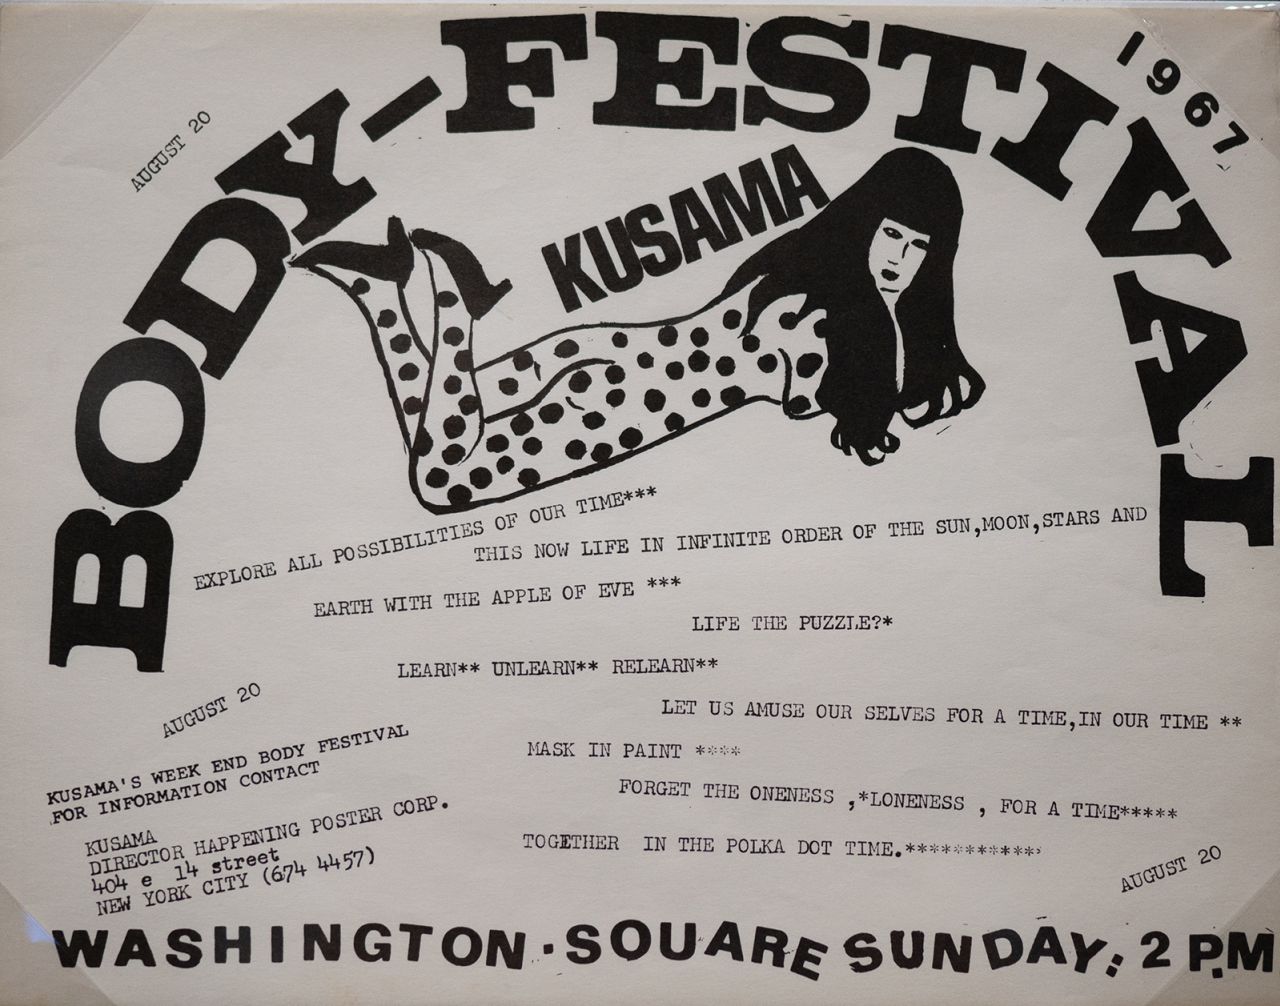 The exhibition includes archival footage and old marketing materials of Yayoi Kusama's "happenings" or performances in the late 60s and 70s. 